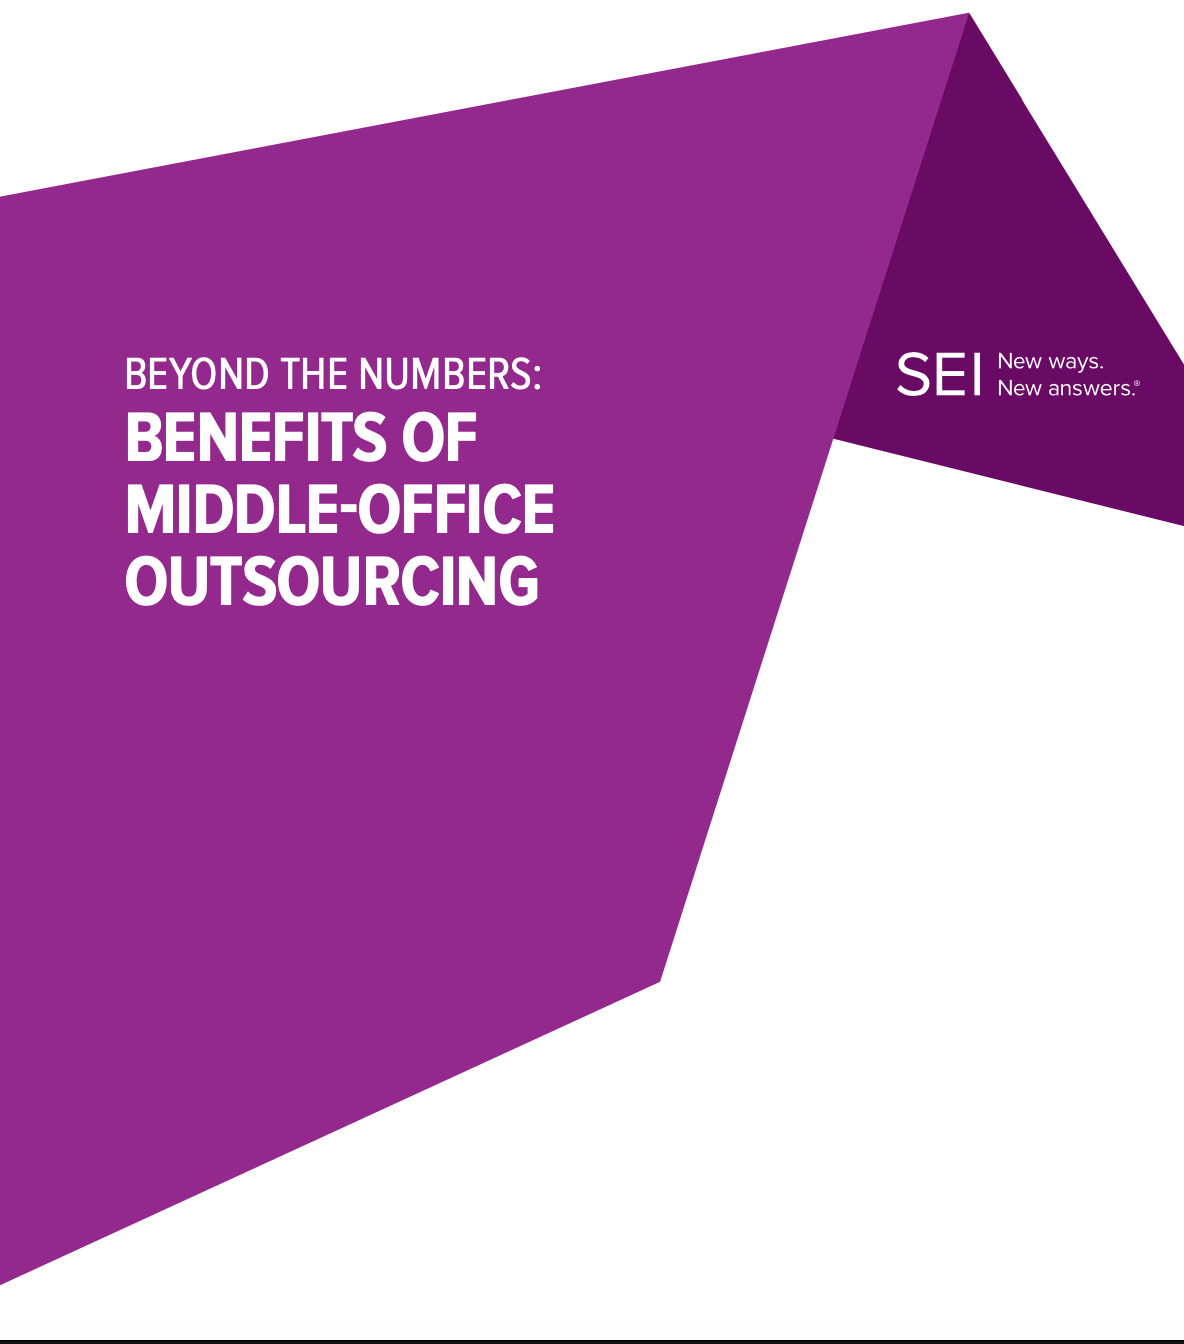 Beyond the numbers: The benefits of middle-office outsourcing